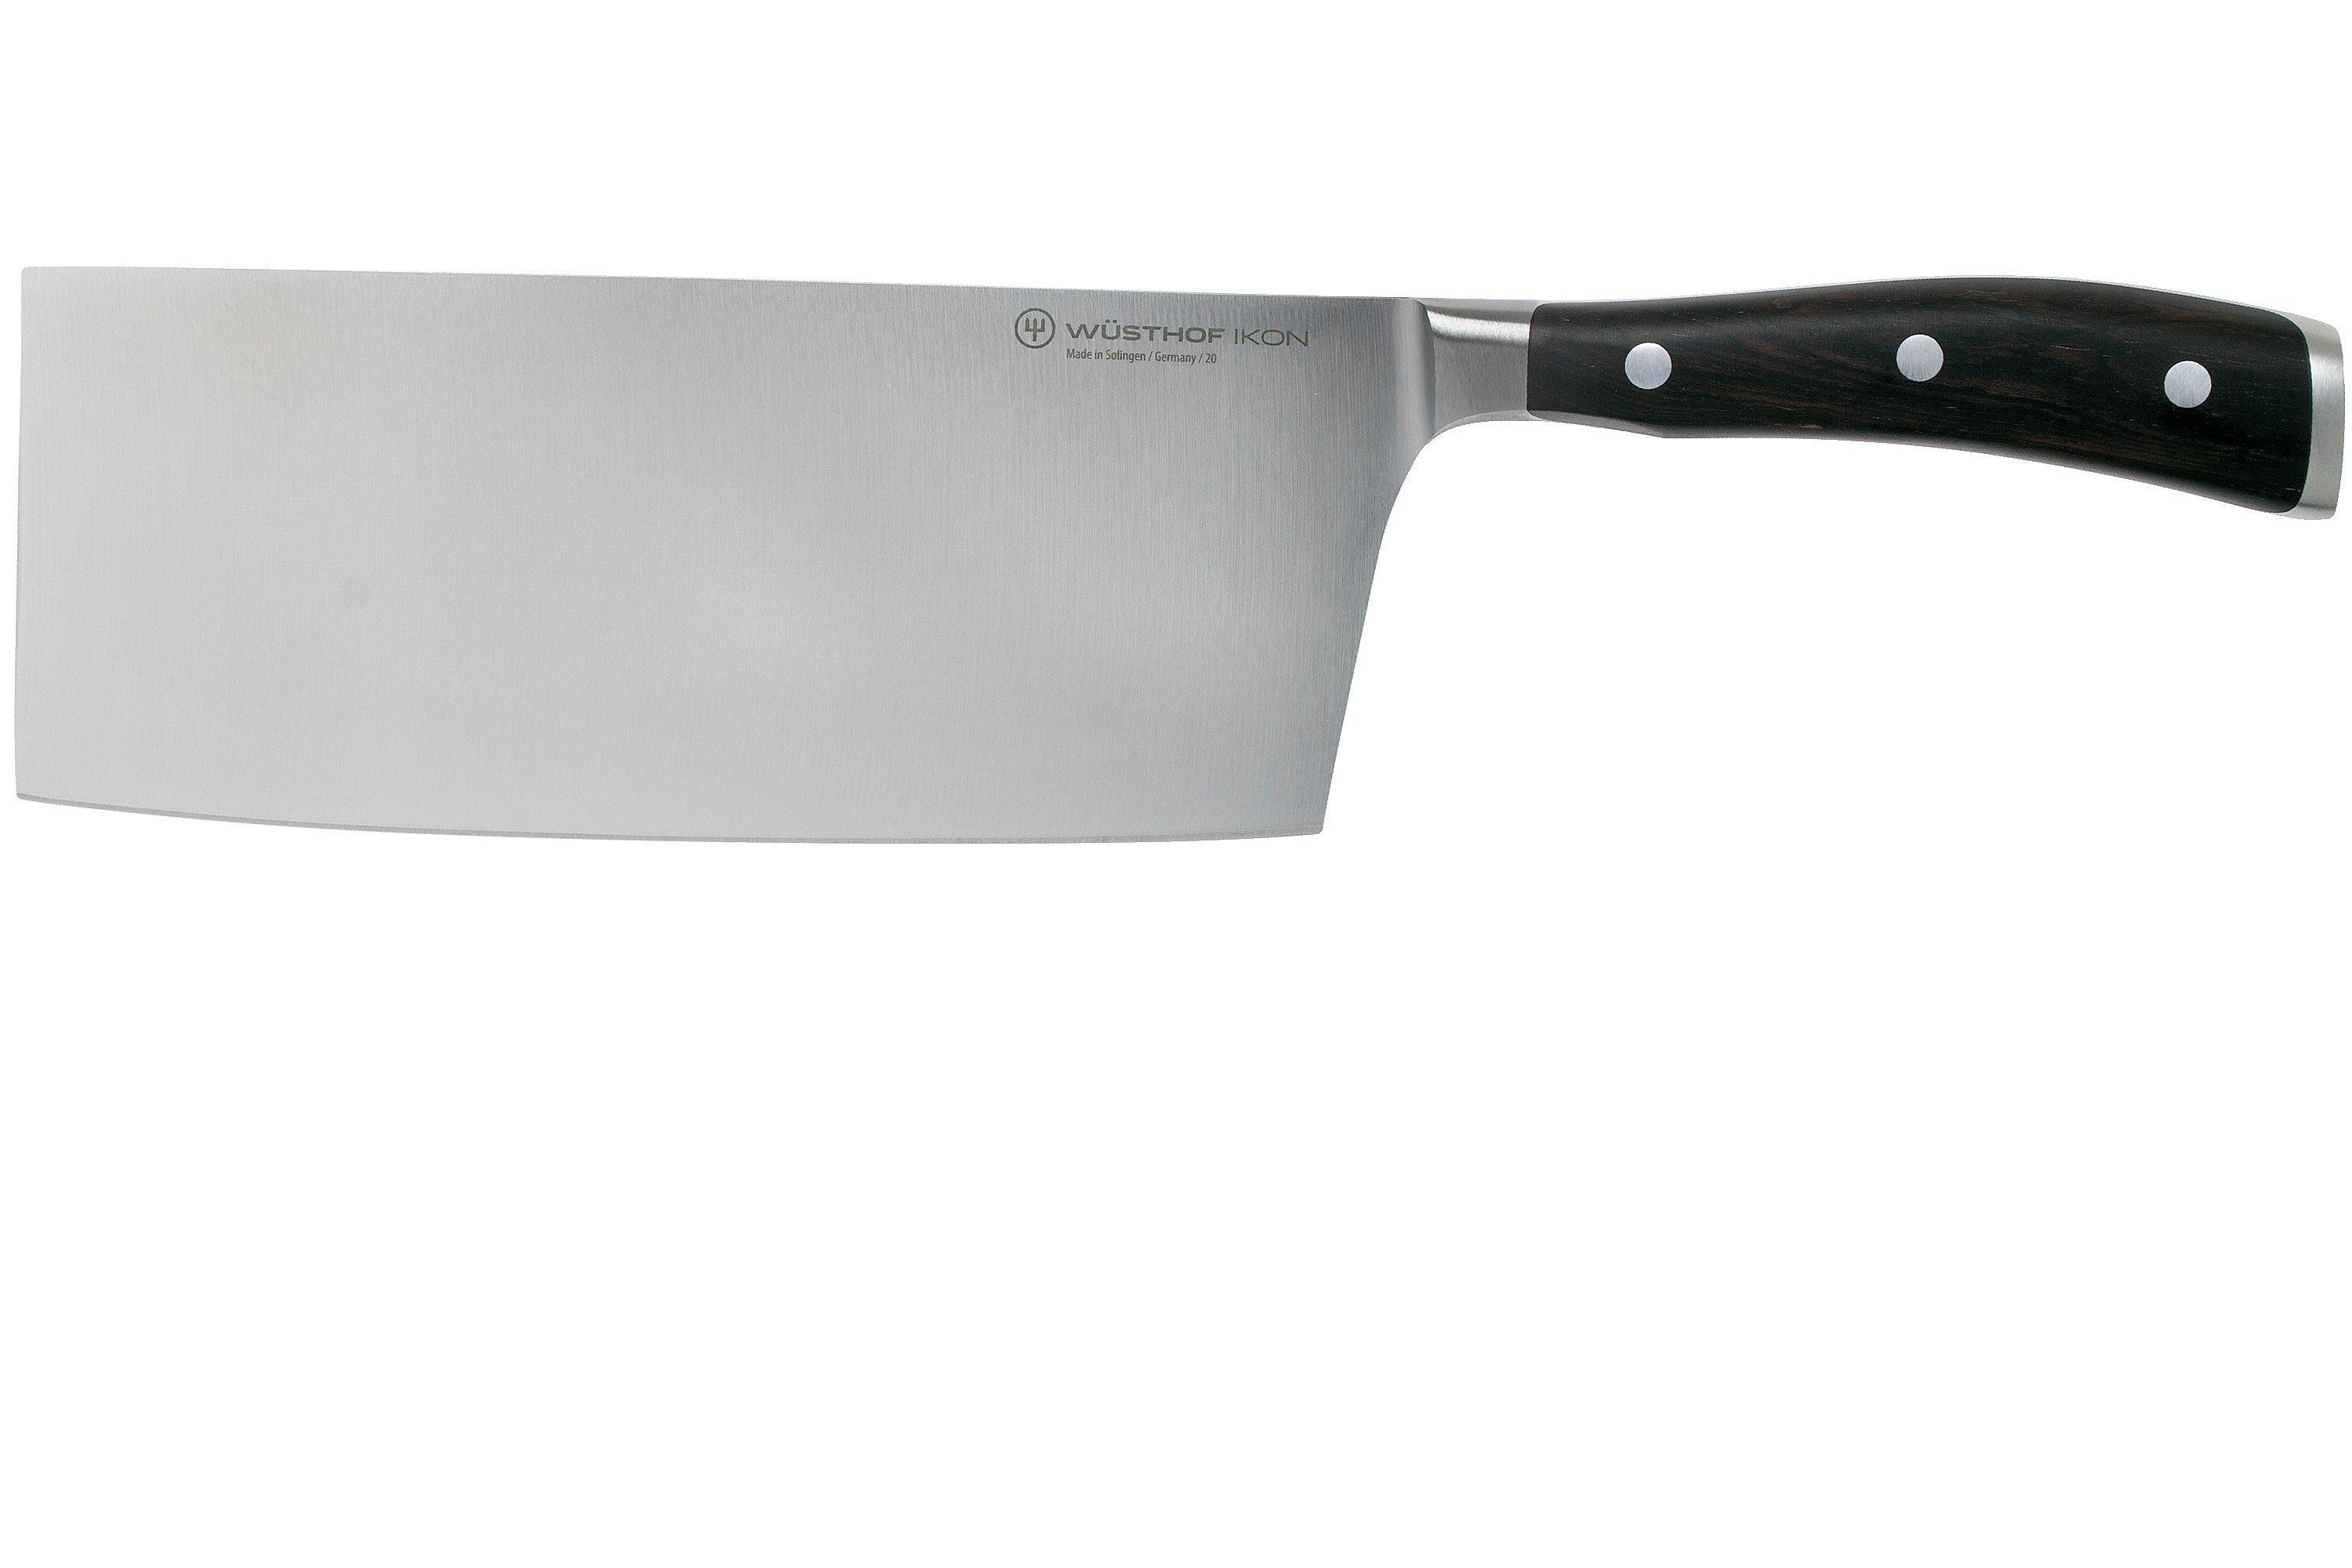 REDUCED Wusthof Classic IKON Chinese Chef/'s Knife 7-inch 4673//18 $350+ Retail